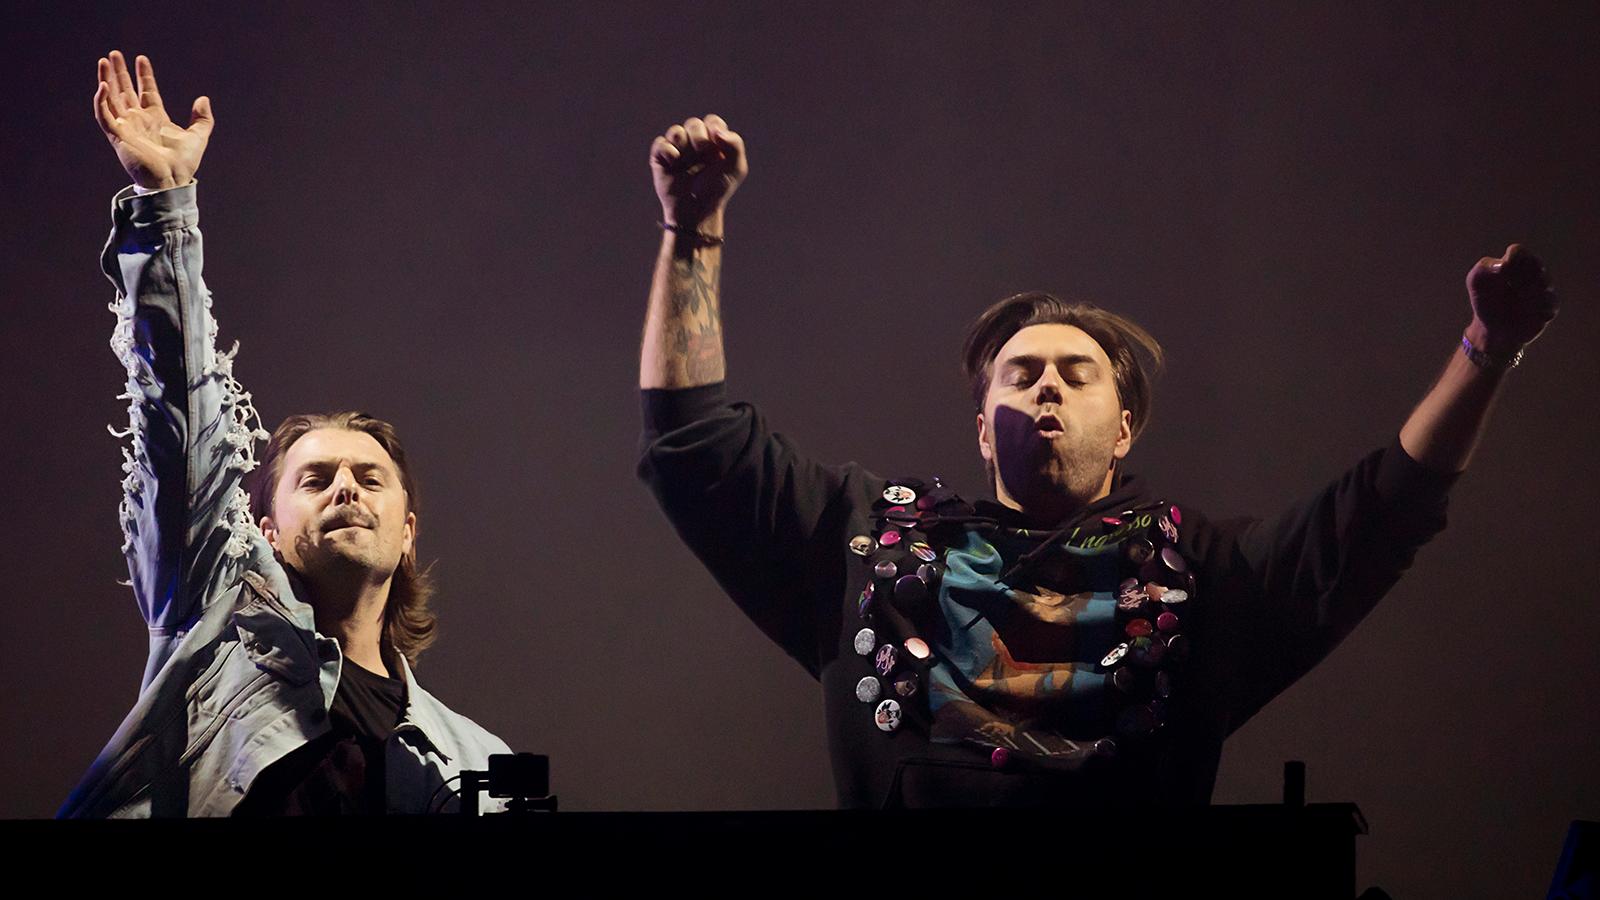 Axwell & Ingrosso.